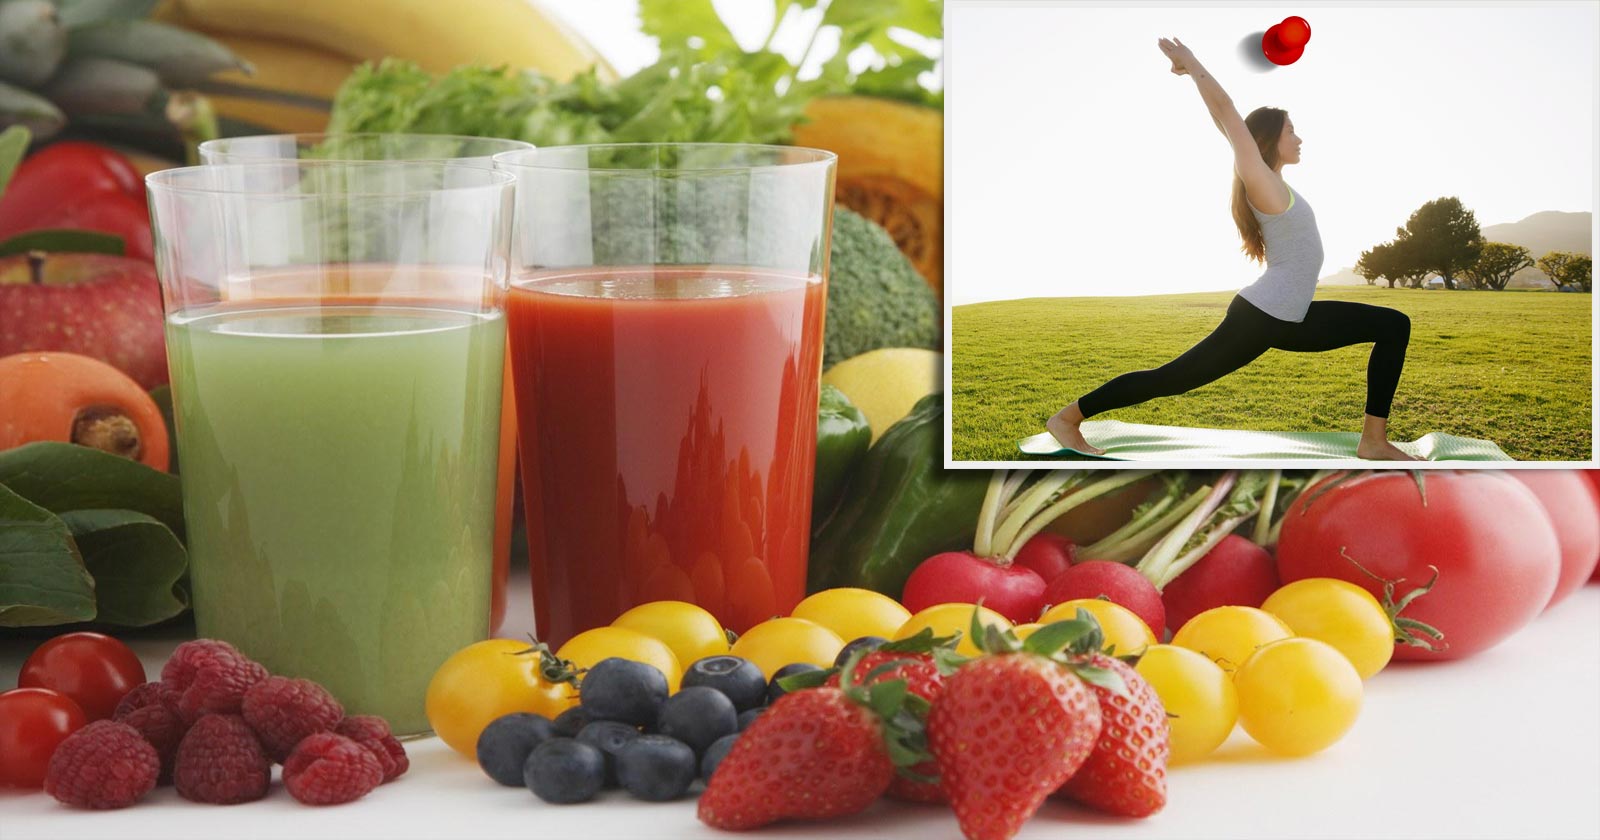 Natural ways to a Healthy Lifestyle